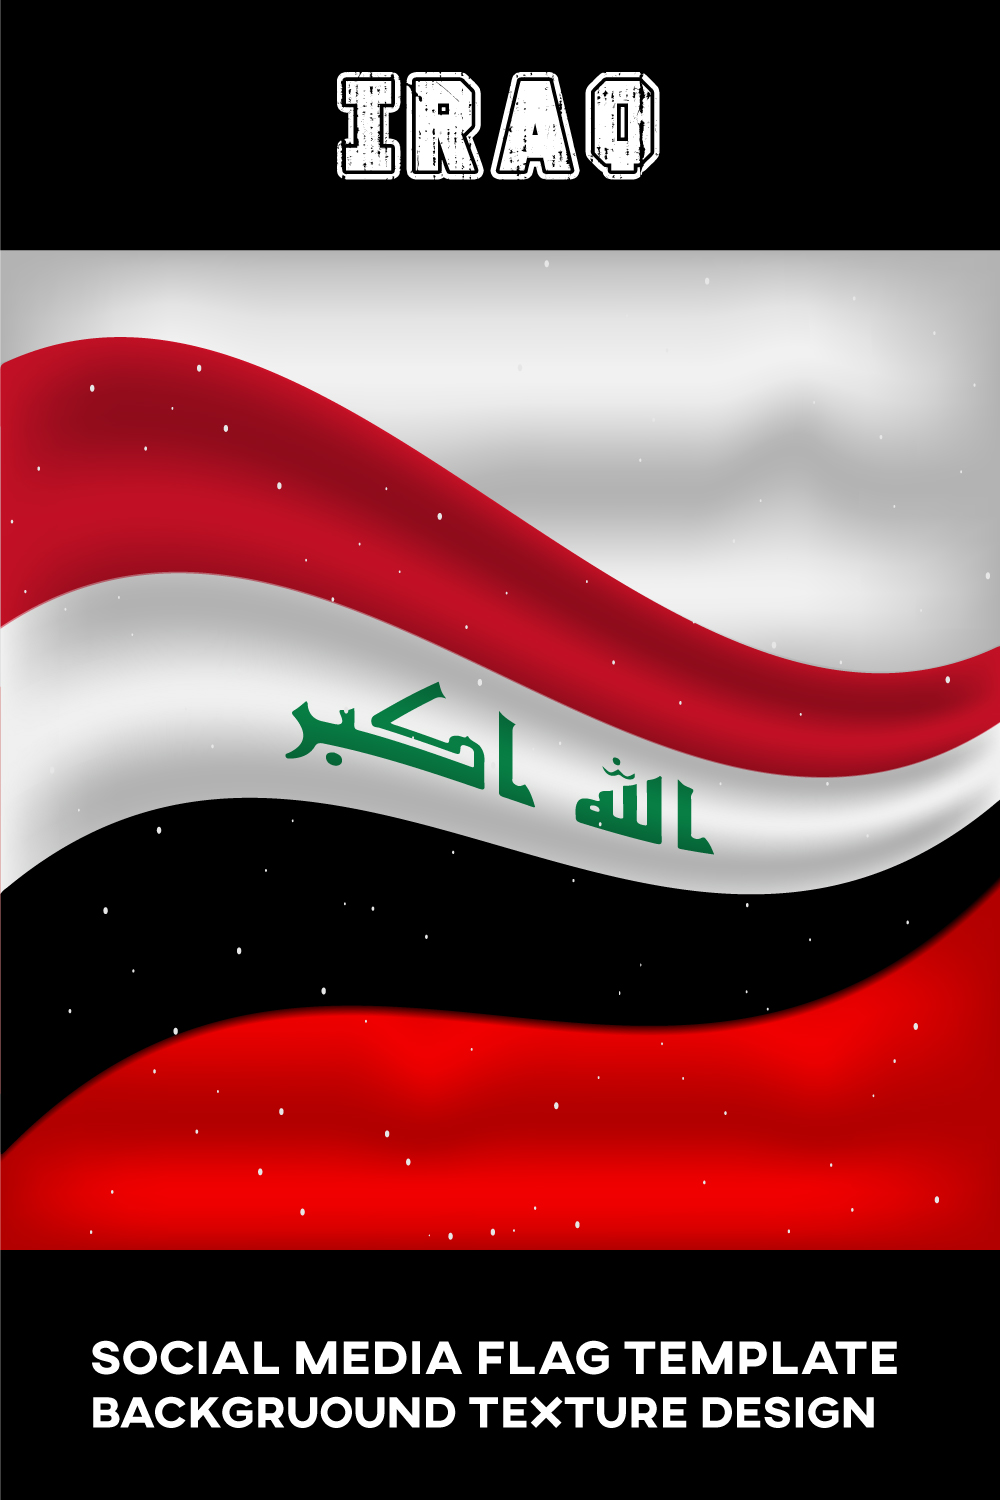 Colorful image of the flag of Iraq.